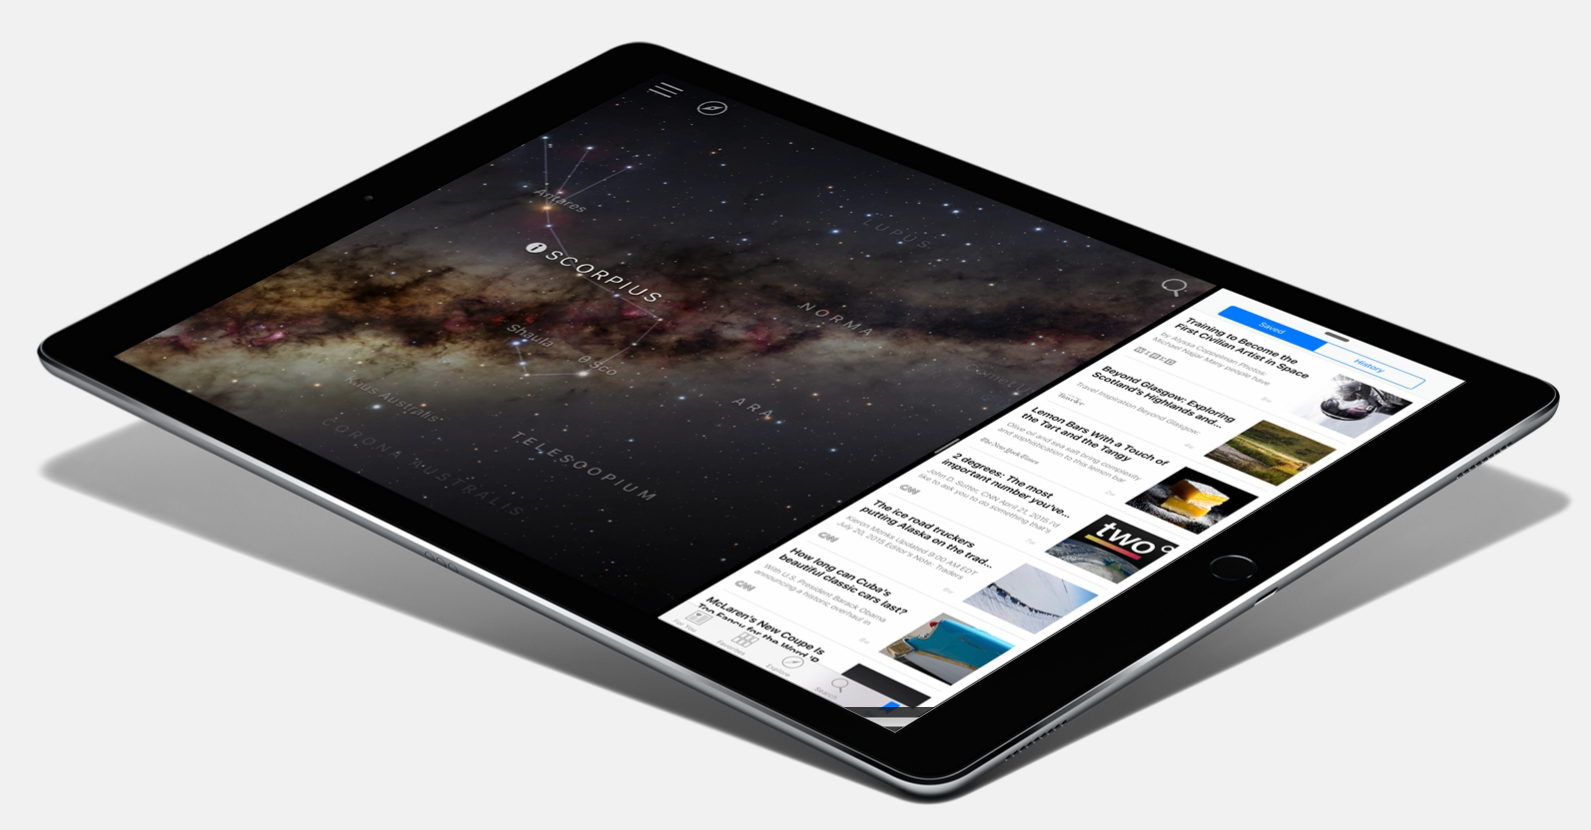 The new iPad Pro: could replace your laptop!